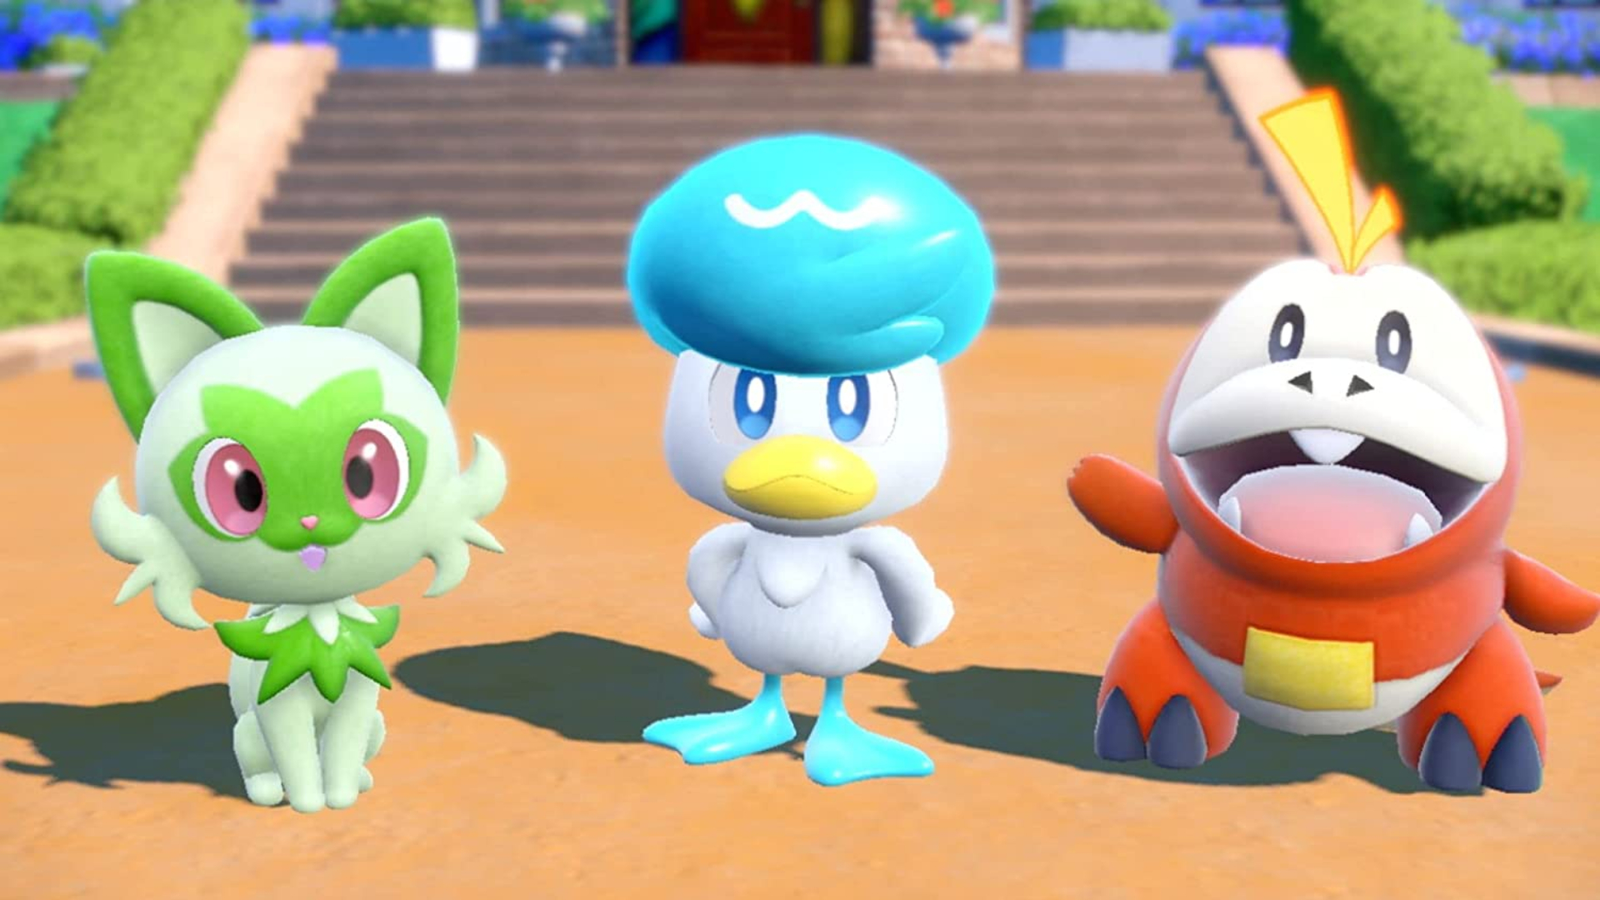 Pokemon Scarlet & Violet leaker claims DLC will introduce new